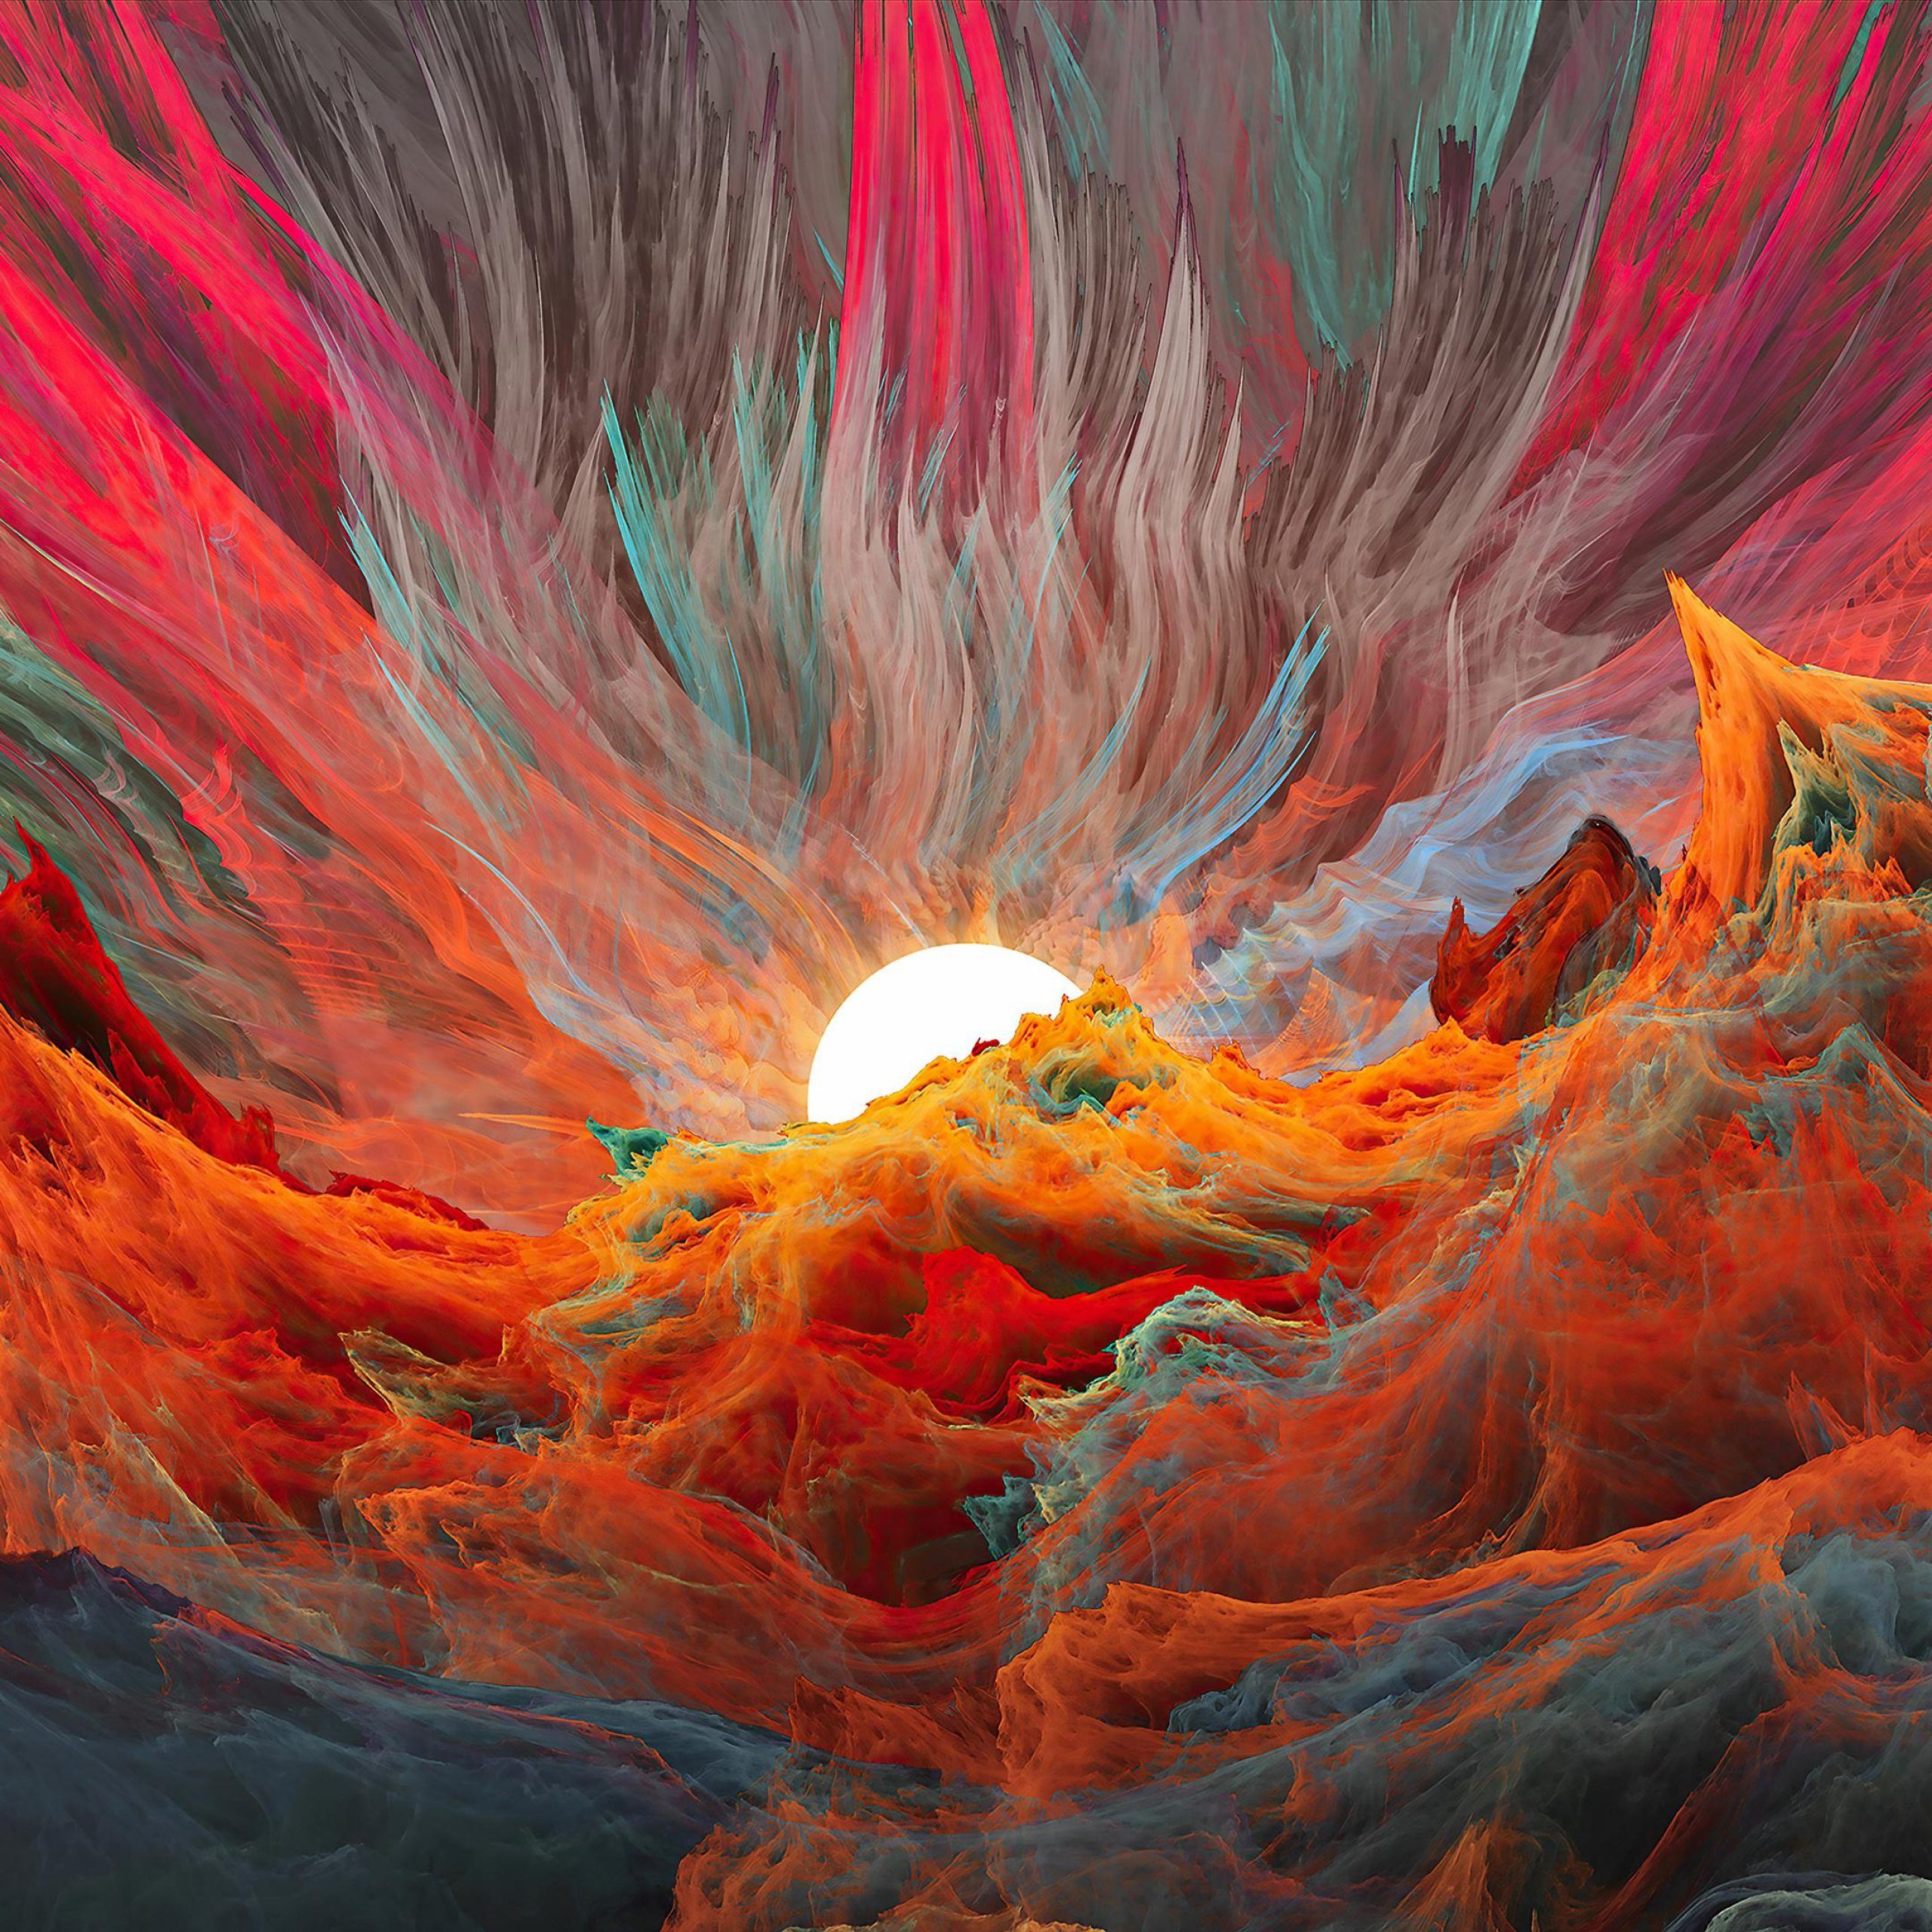 Sunset Abstract Art 4k Wallpaper Throughout Most Current Sunset Wall Art (View 17 of 20)